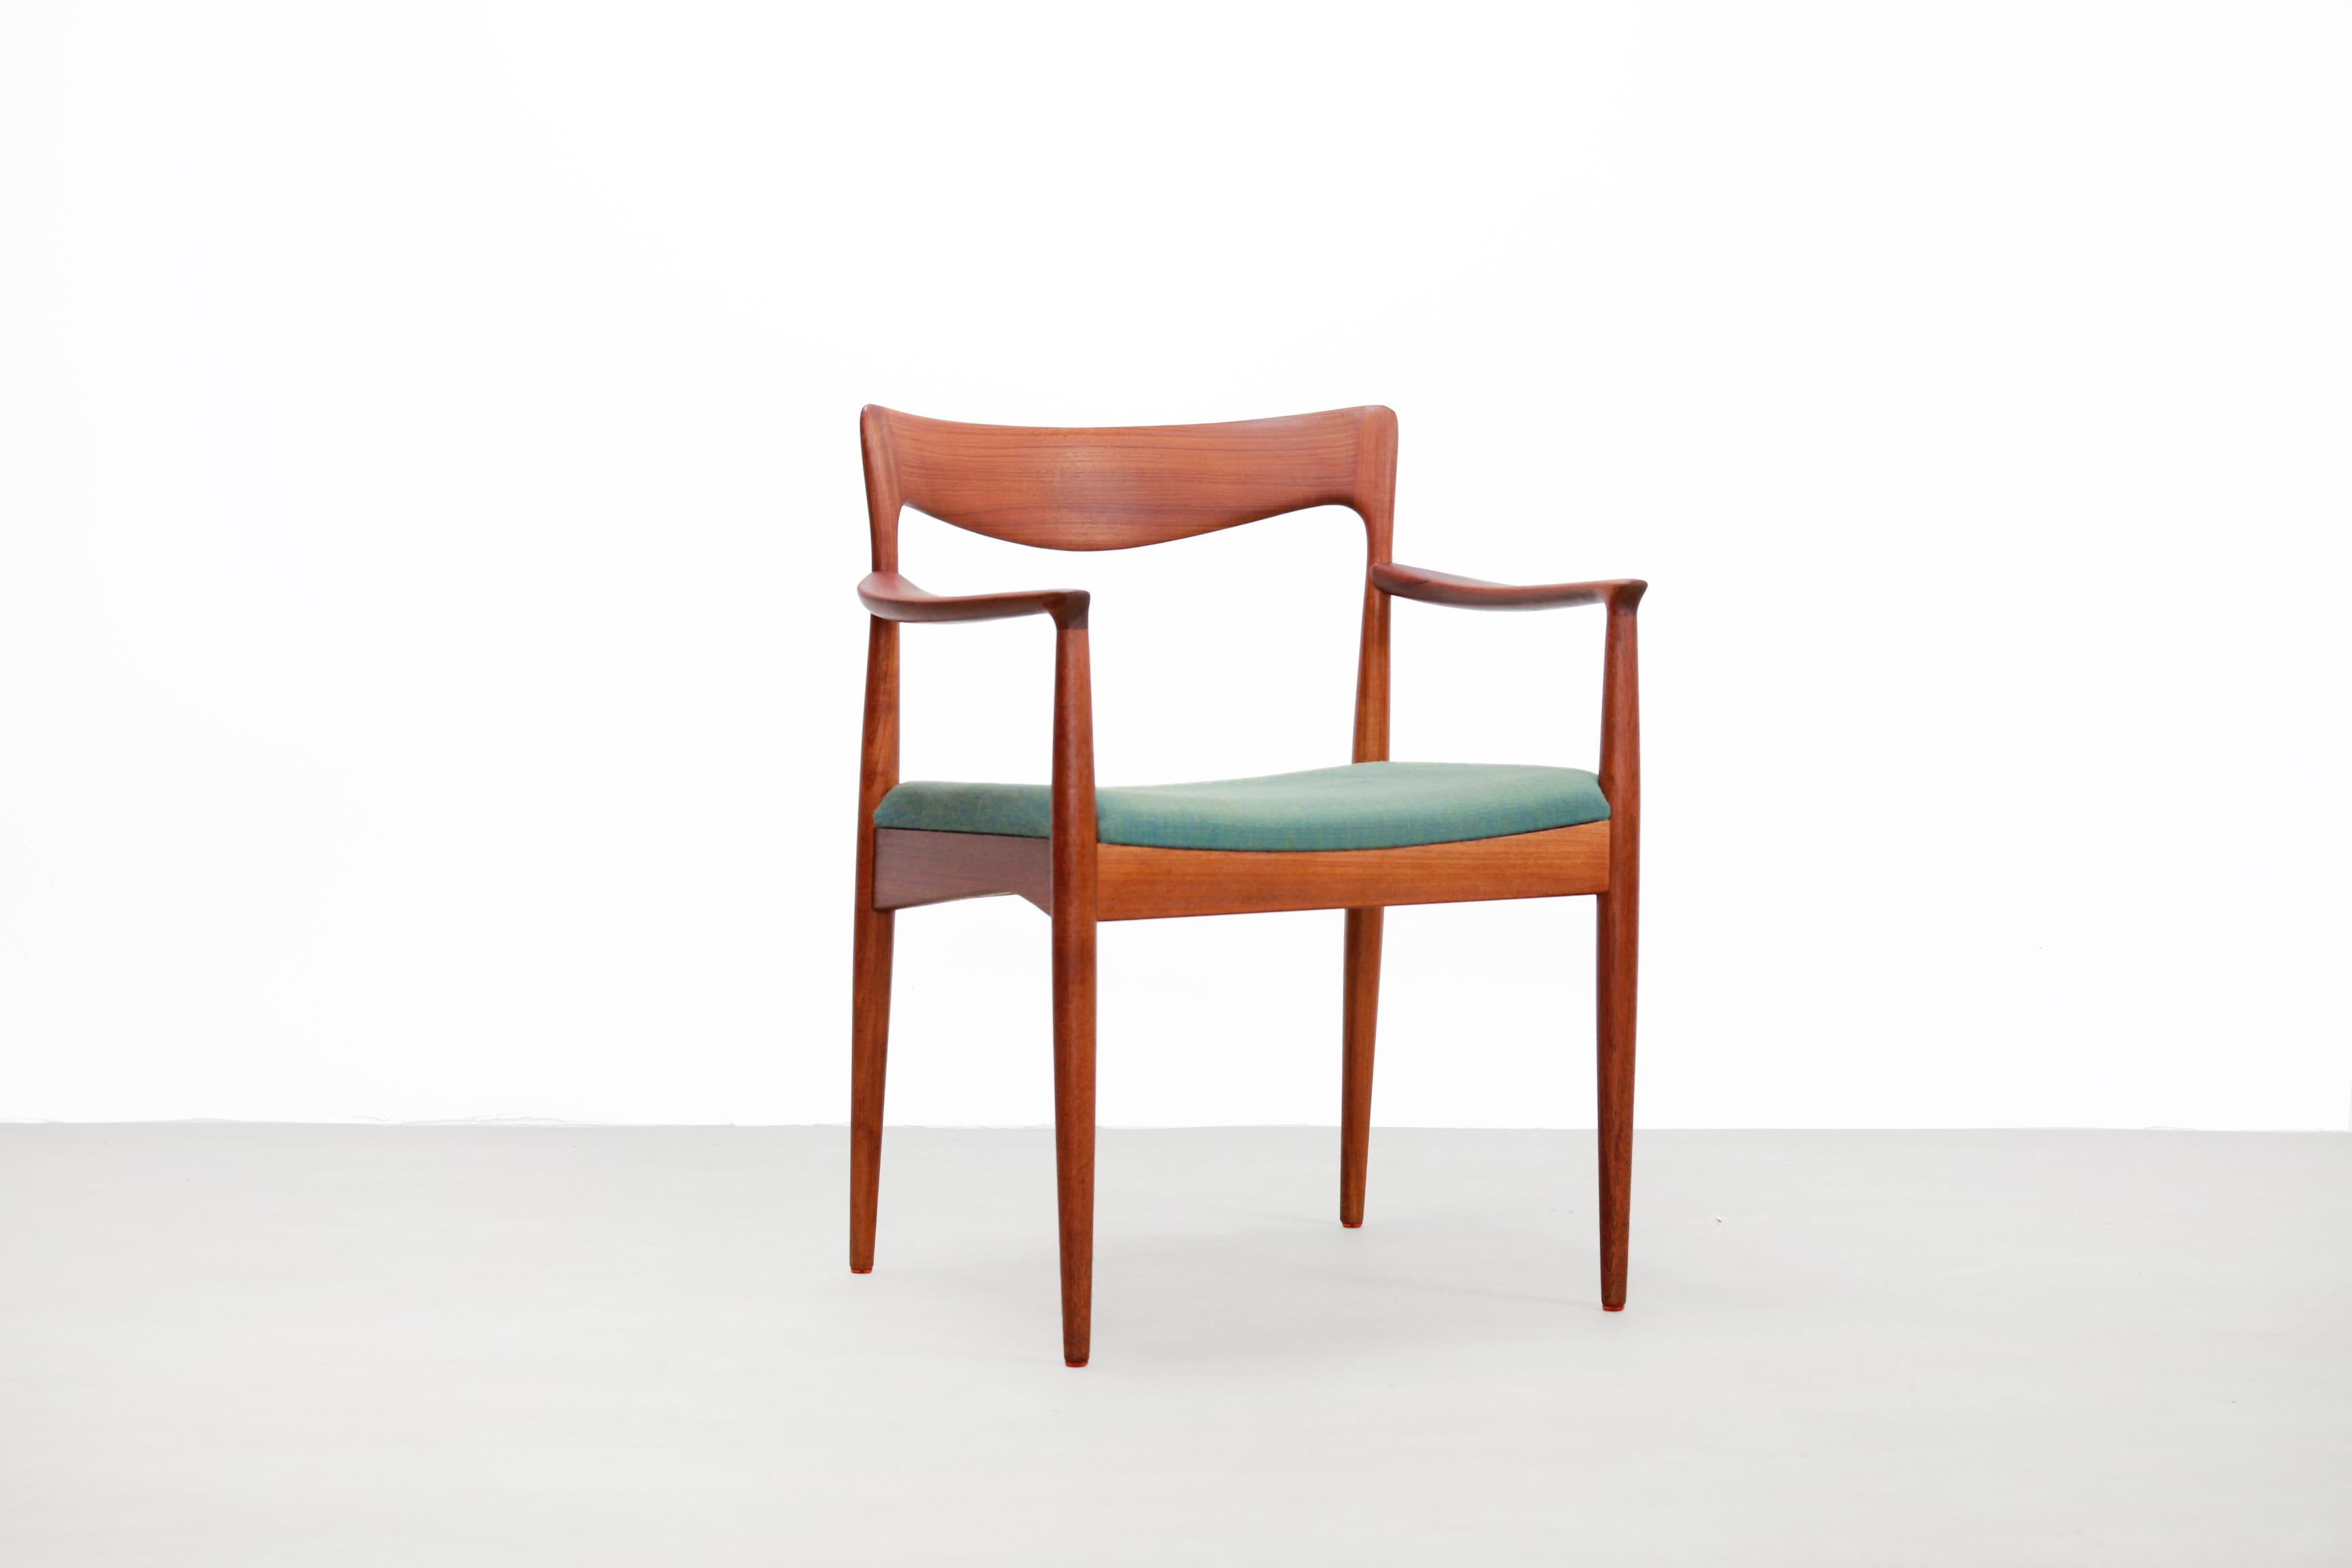 Elegant and very sculptural designed armchair designed by Arne Vodder and produced by Vamo Møbelfabrik from Sonderborg, Denmark. This organic shaped chair is made of solid teak wood and upholstered with a beautiful woolen turquoise fabric. In